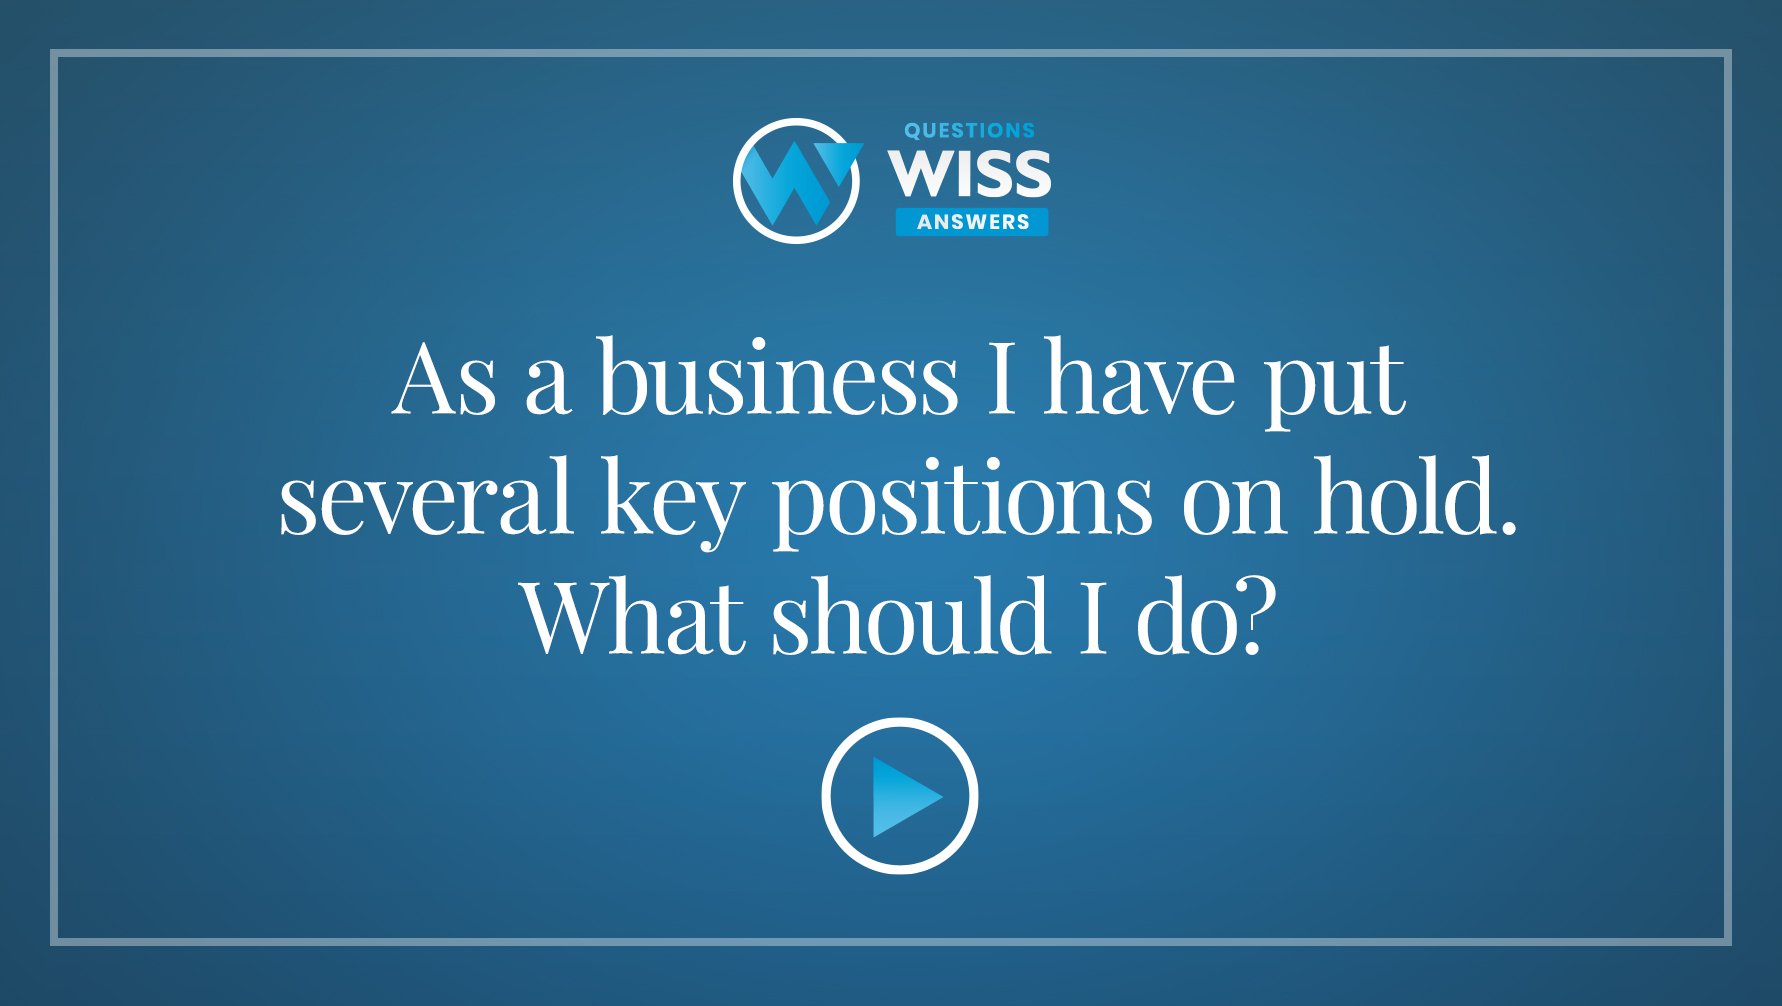 As a business I have put several key positions on hold. What should I do?